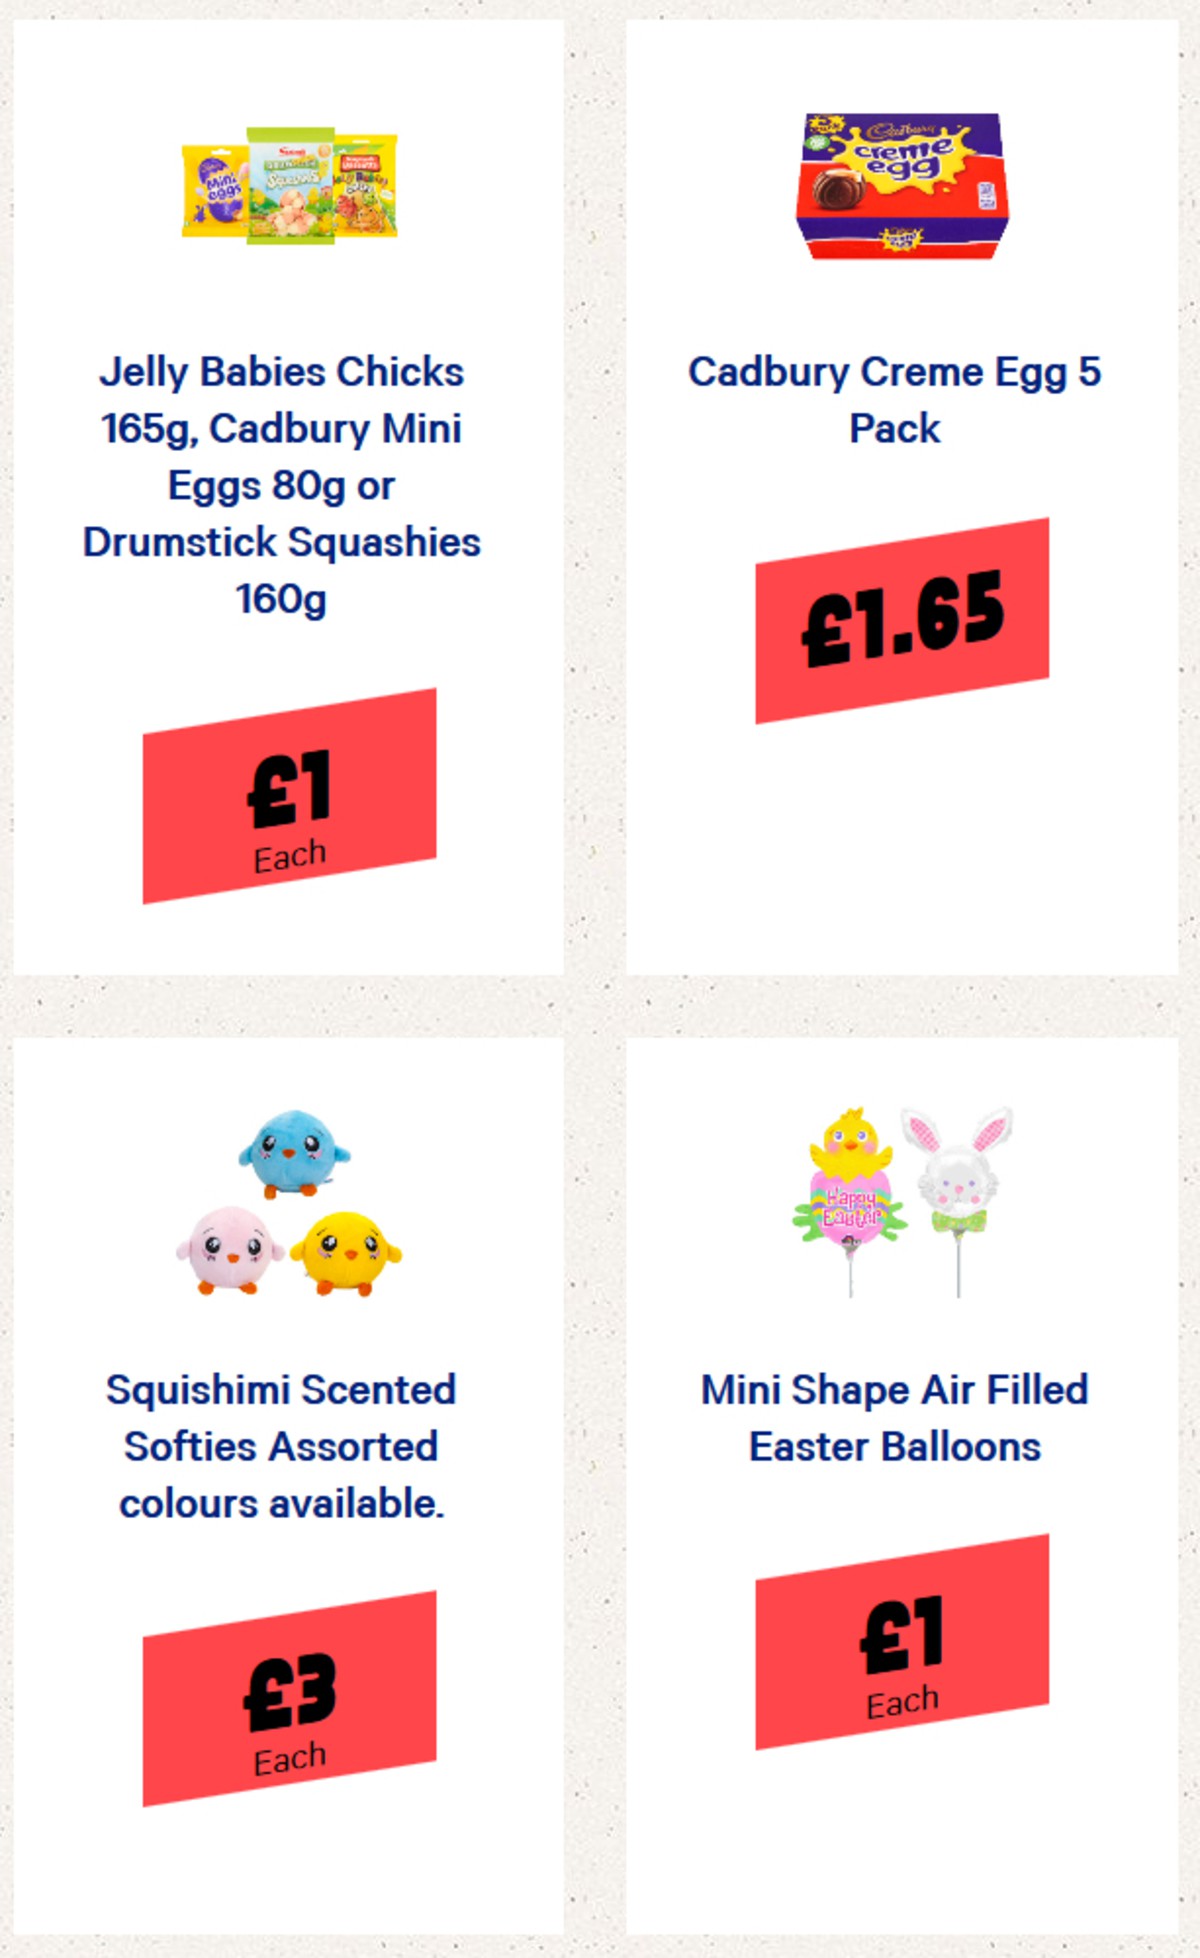 Jack's Offers from 3 April